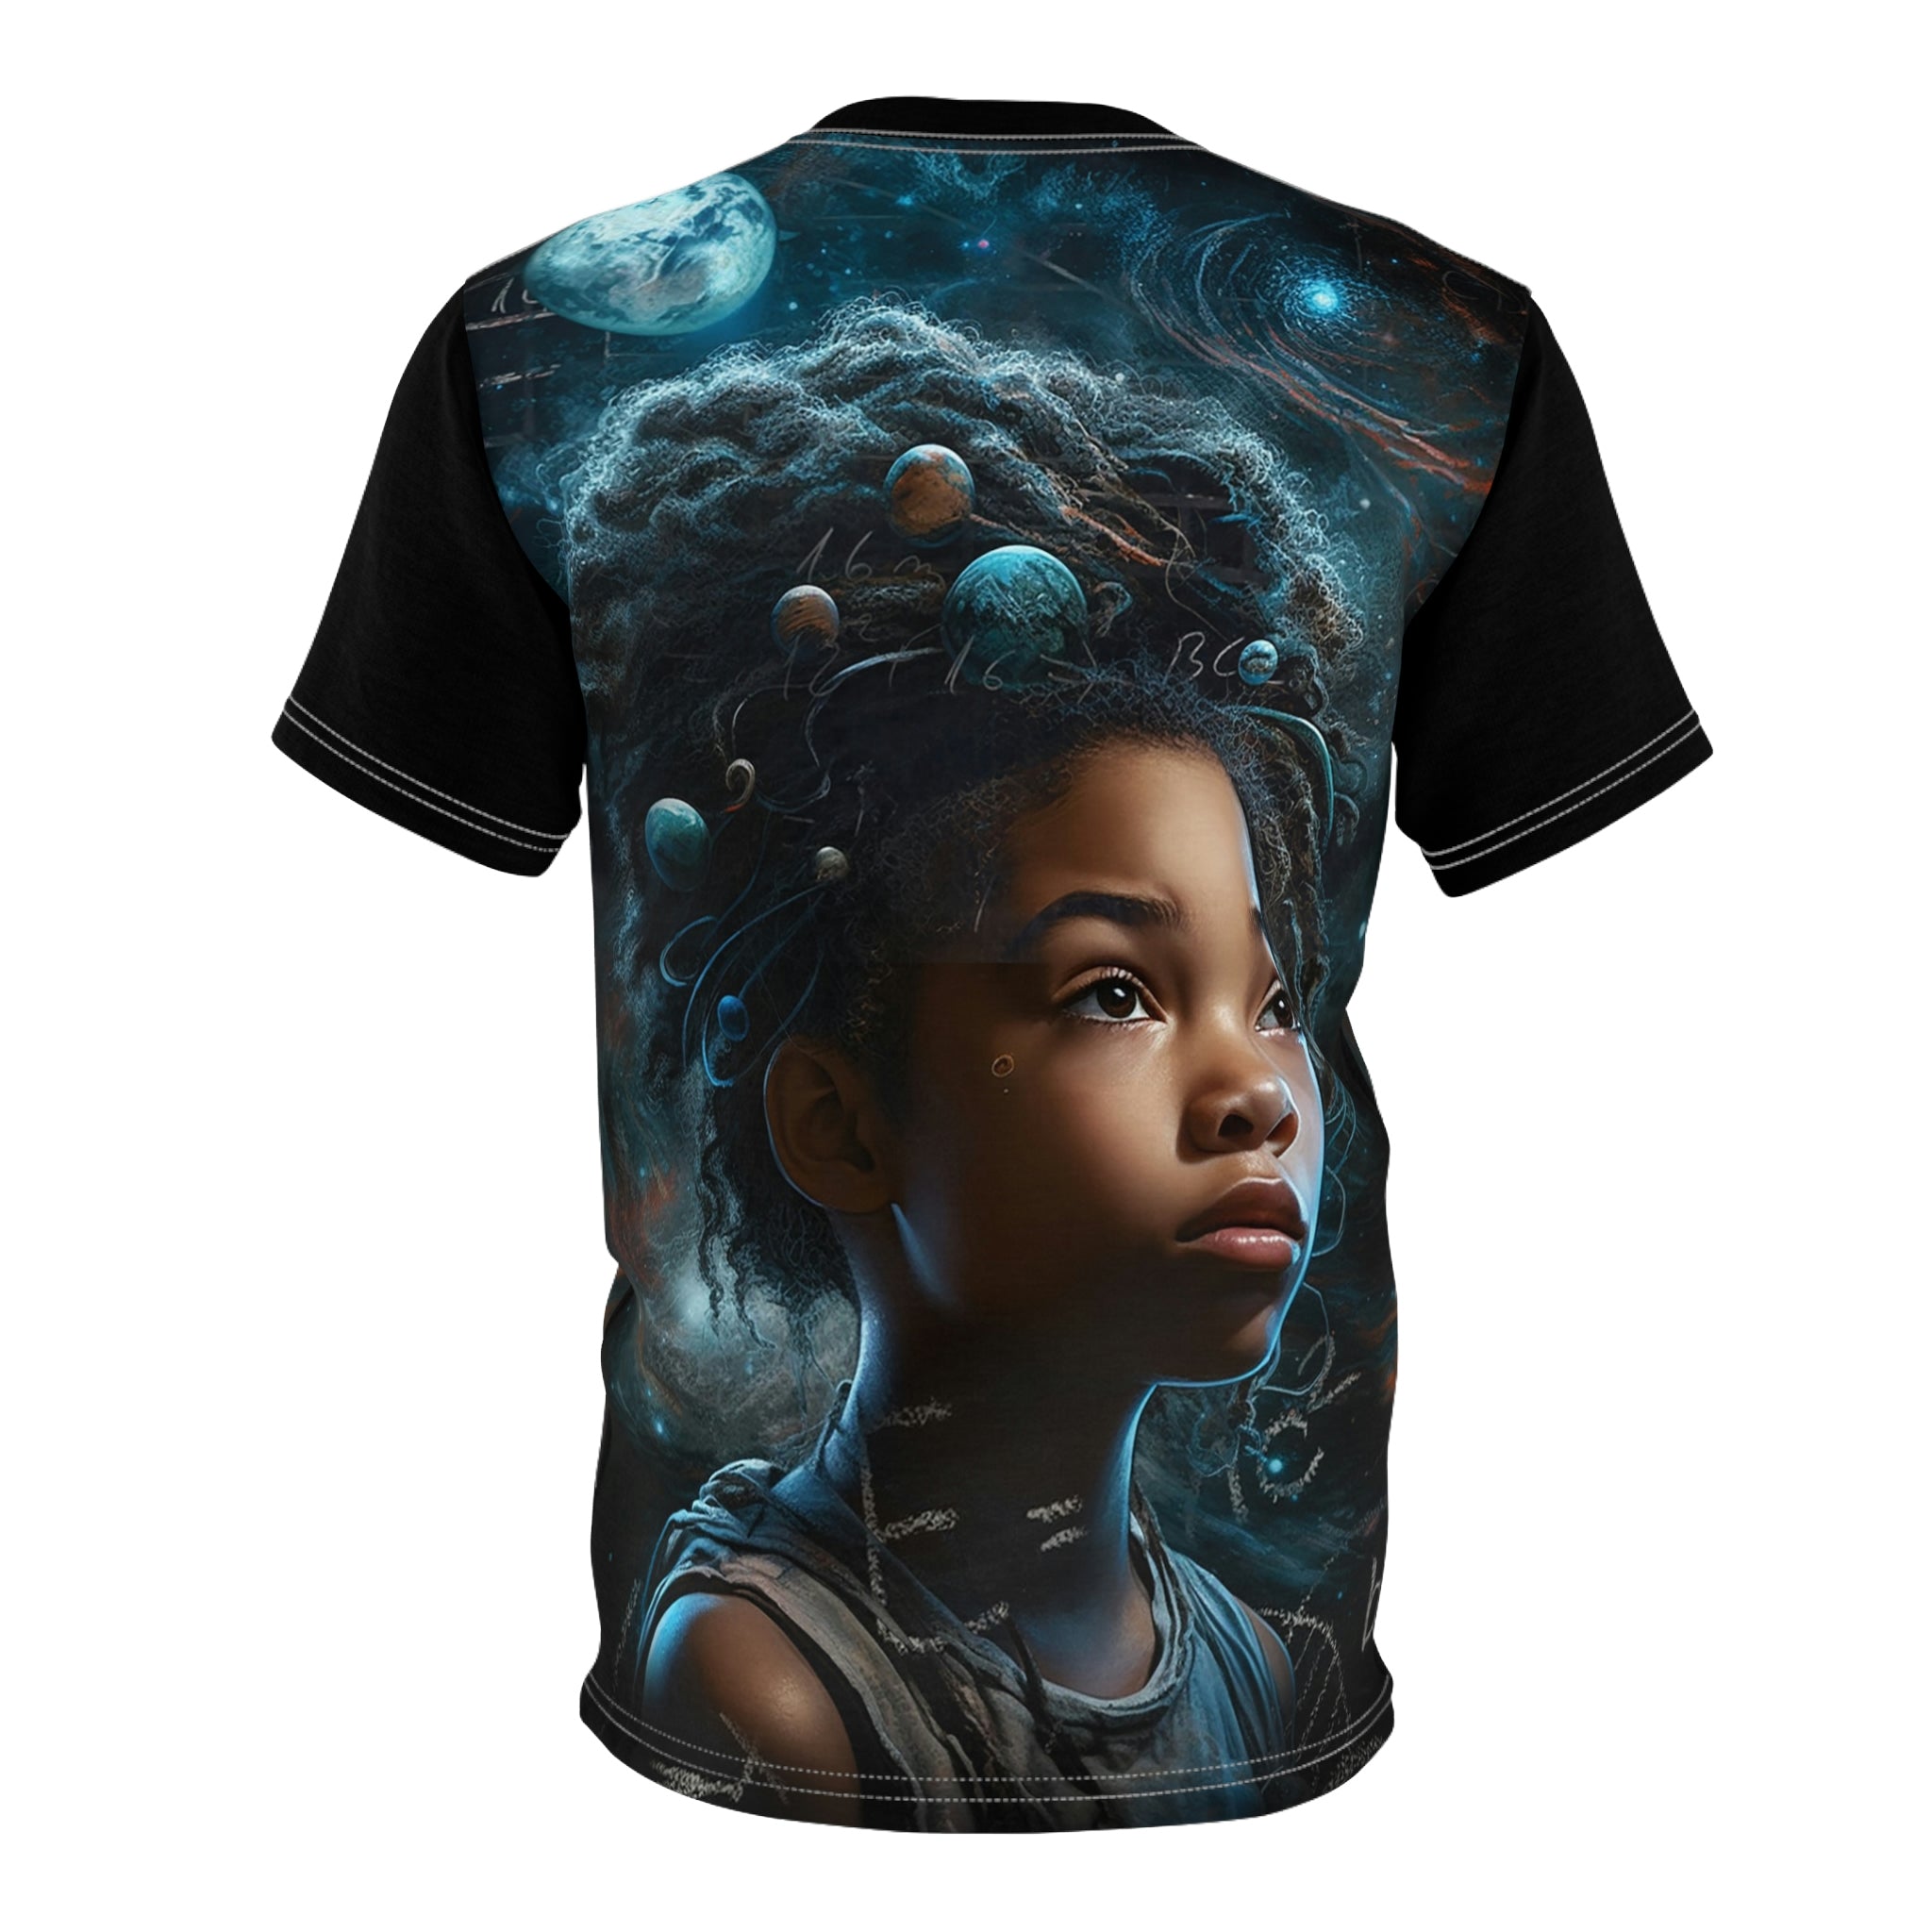 "REACH FOR THE STARS" - African American Themed Unisex Tee